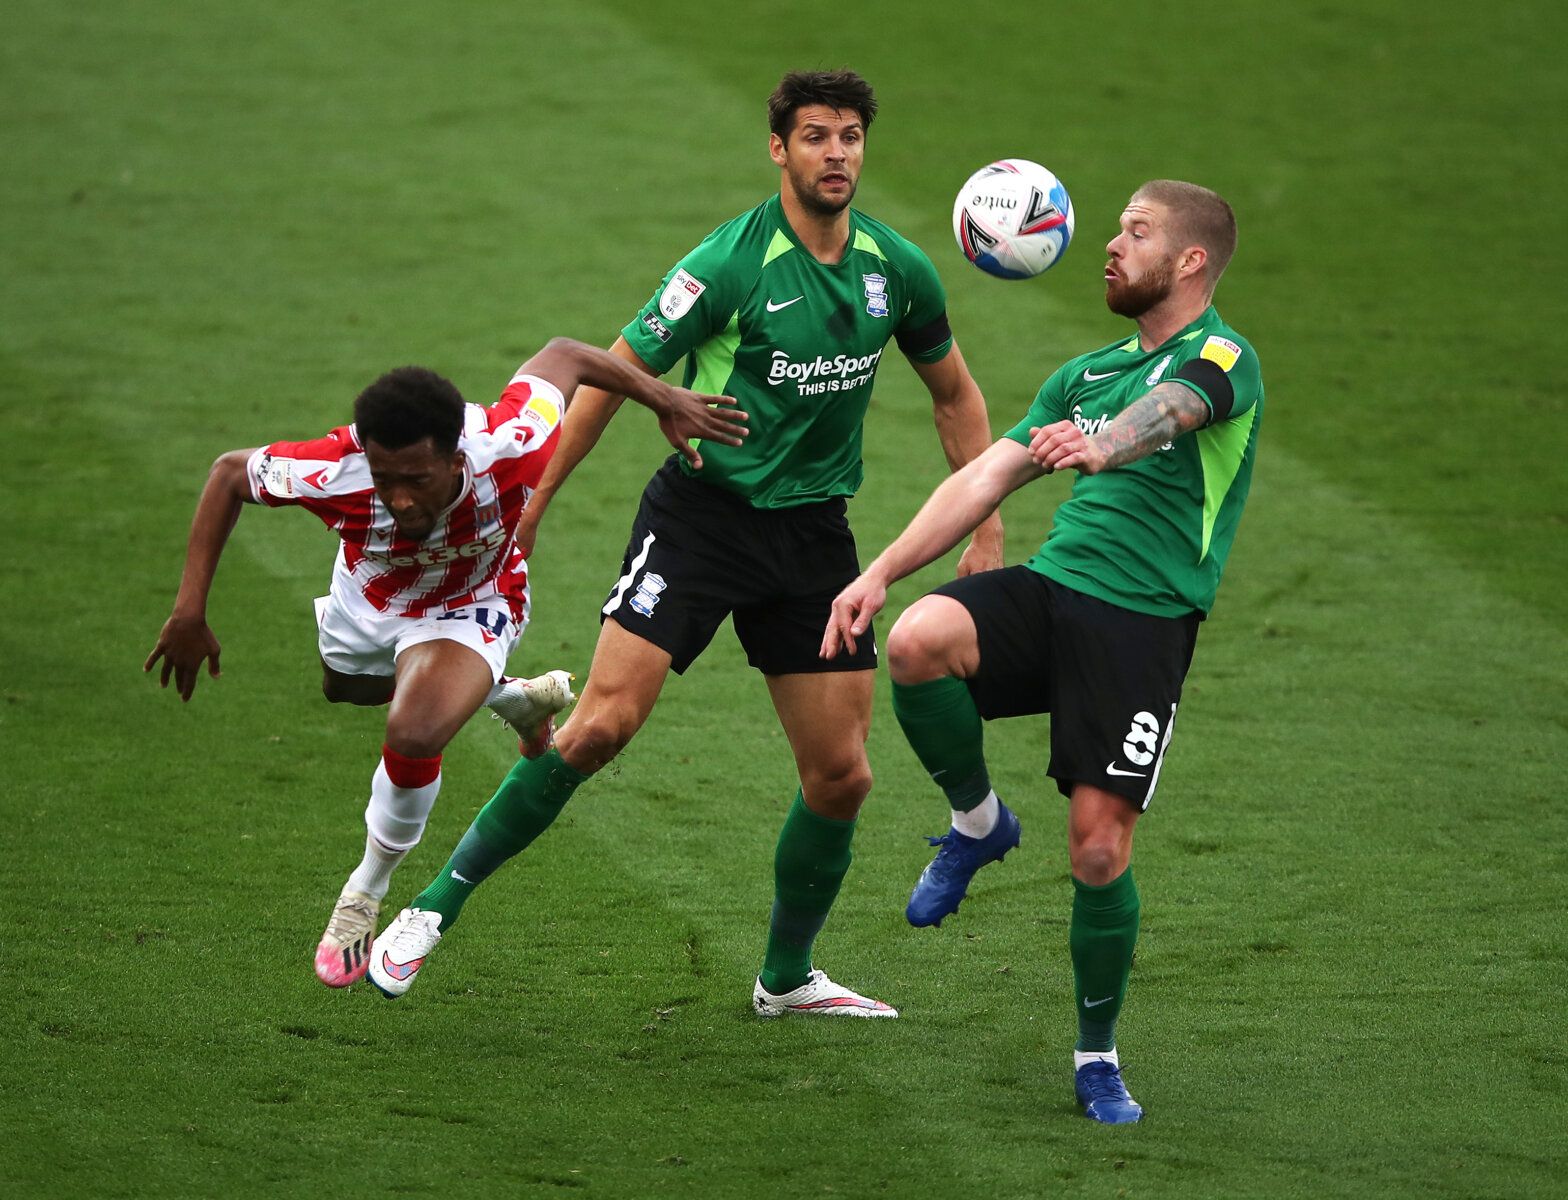 Soccer Football - Championship - Stoke City v Birmingham City - bet365 Stadium, Stoke-on-Trent, Britain - October 4, 2020 Stoke City's Tashan Oakley-Boothe in action with Birmingham City's George Friend and Adam Clayton Action Images/Molly Darlington EDITORIAL USE ONLY. No use with unauthorized audio, video, data, fixture lists, club/league logos or 'live' services. Online in-match use limited to 75 images, no video emulation. No use in betting, games or single club /league/player publications. 